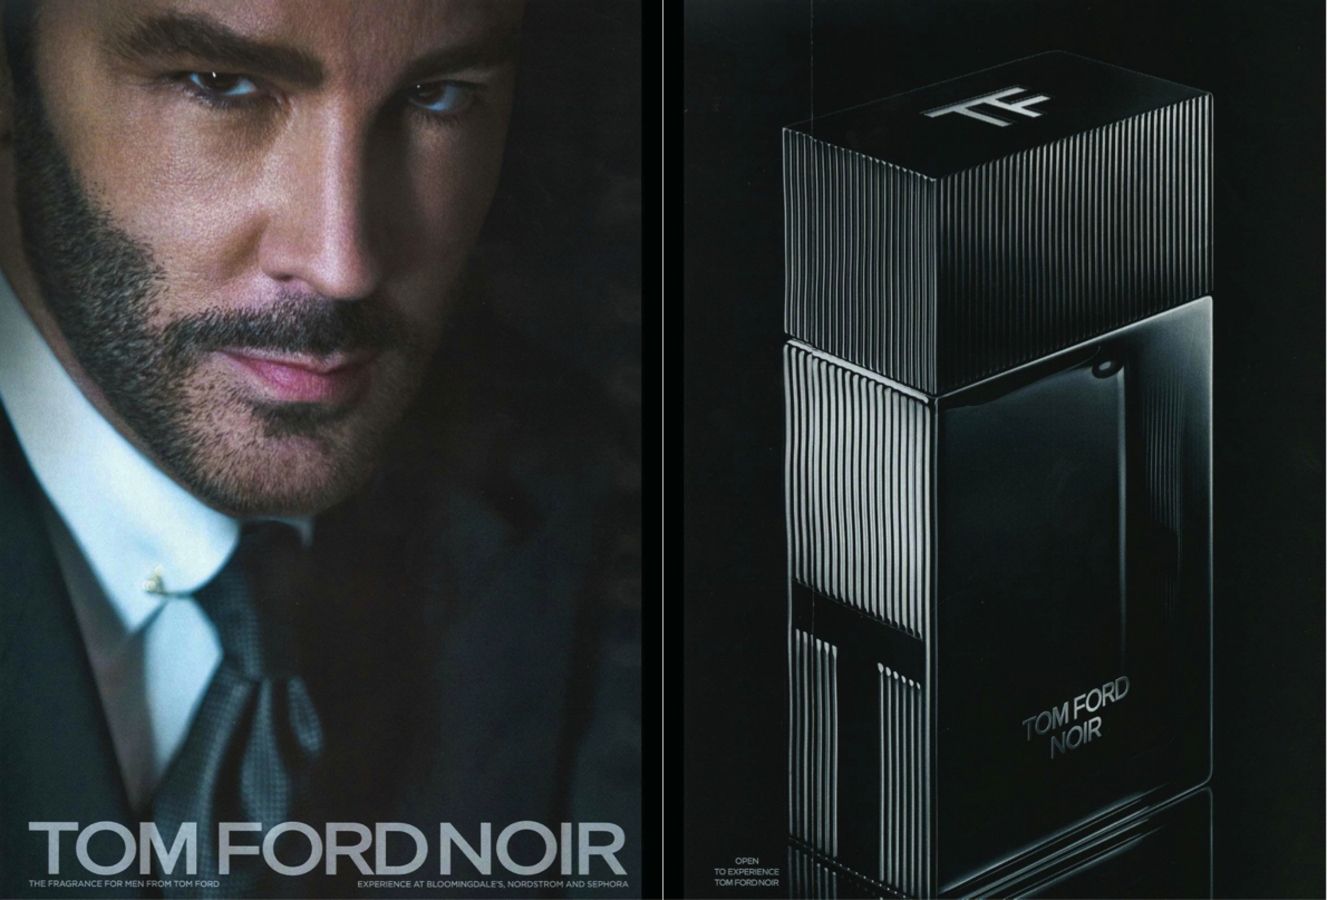 The Essentialist - Fashion Advertising Updated Daily: Tom Ford Noir Ad ...